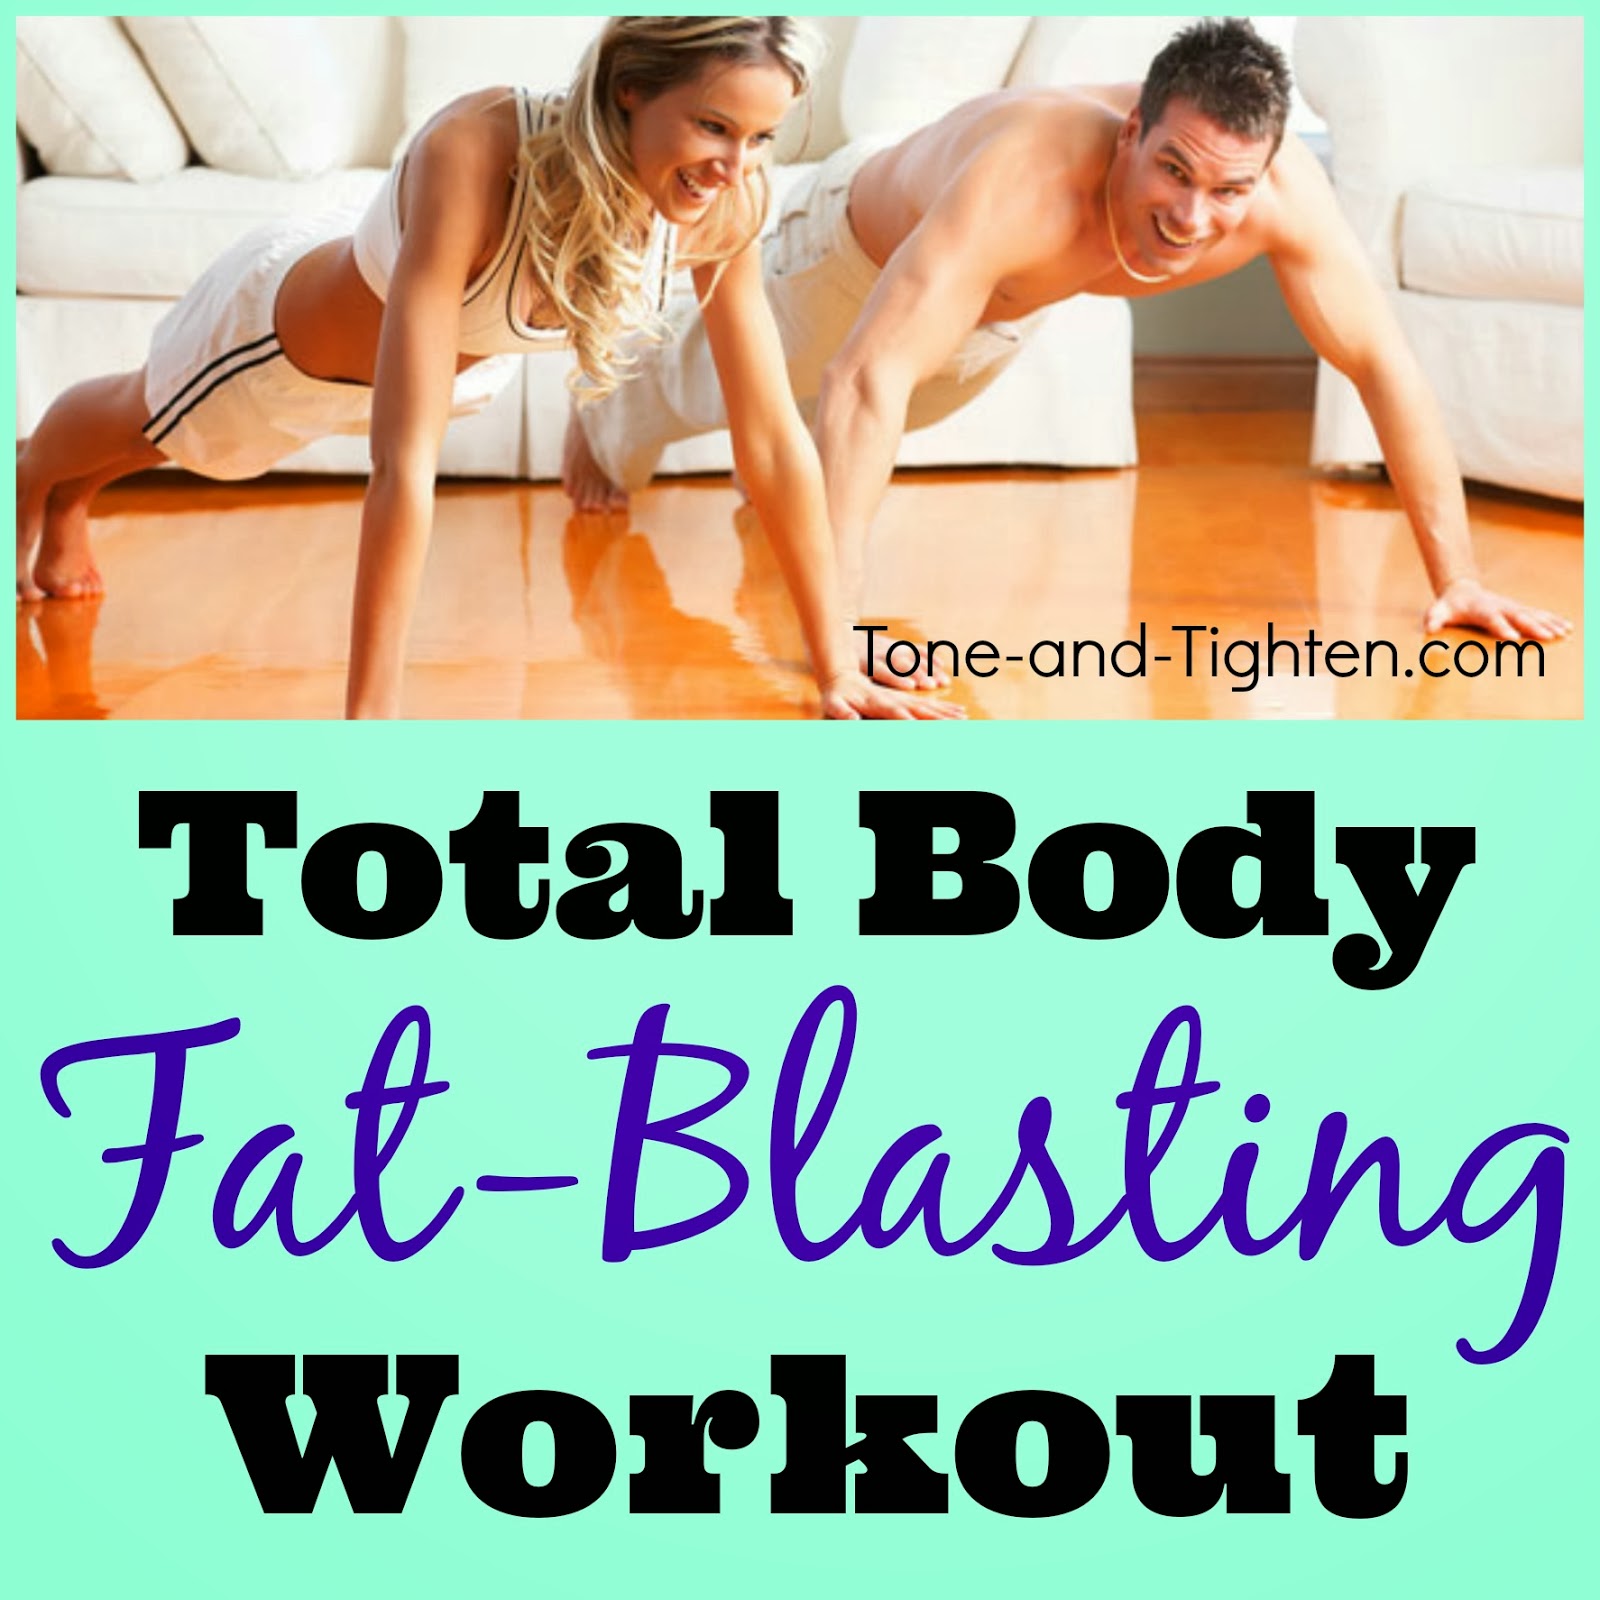 Fat-Blasting Workout – No Equipment Needed!